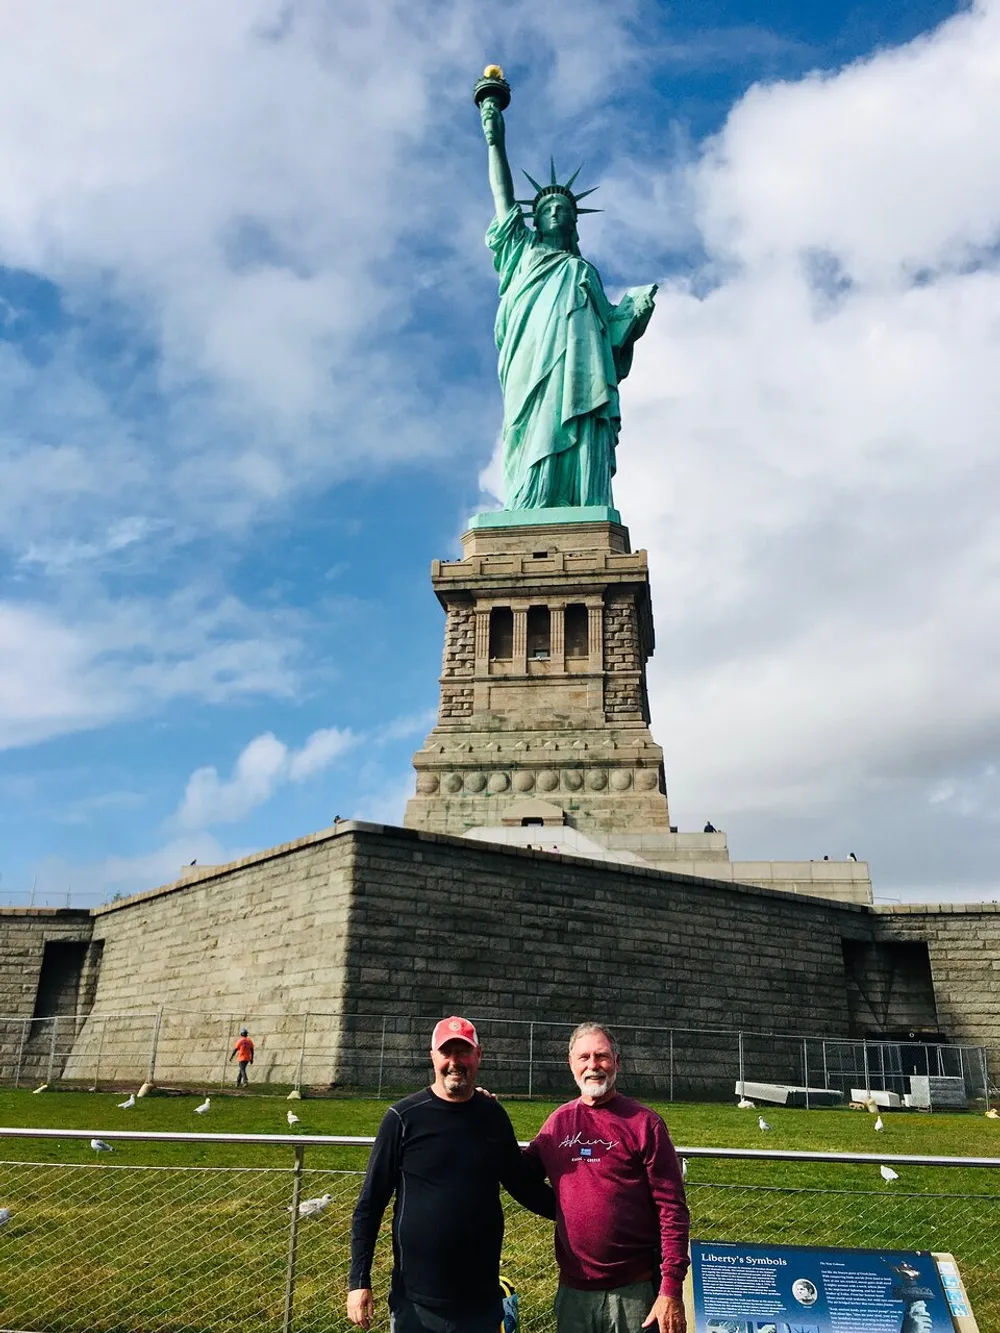 Two individuals are posing for a photo in front of the Statue of Liberty on a day with a partly cloudy sky